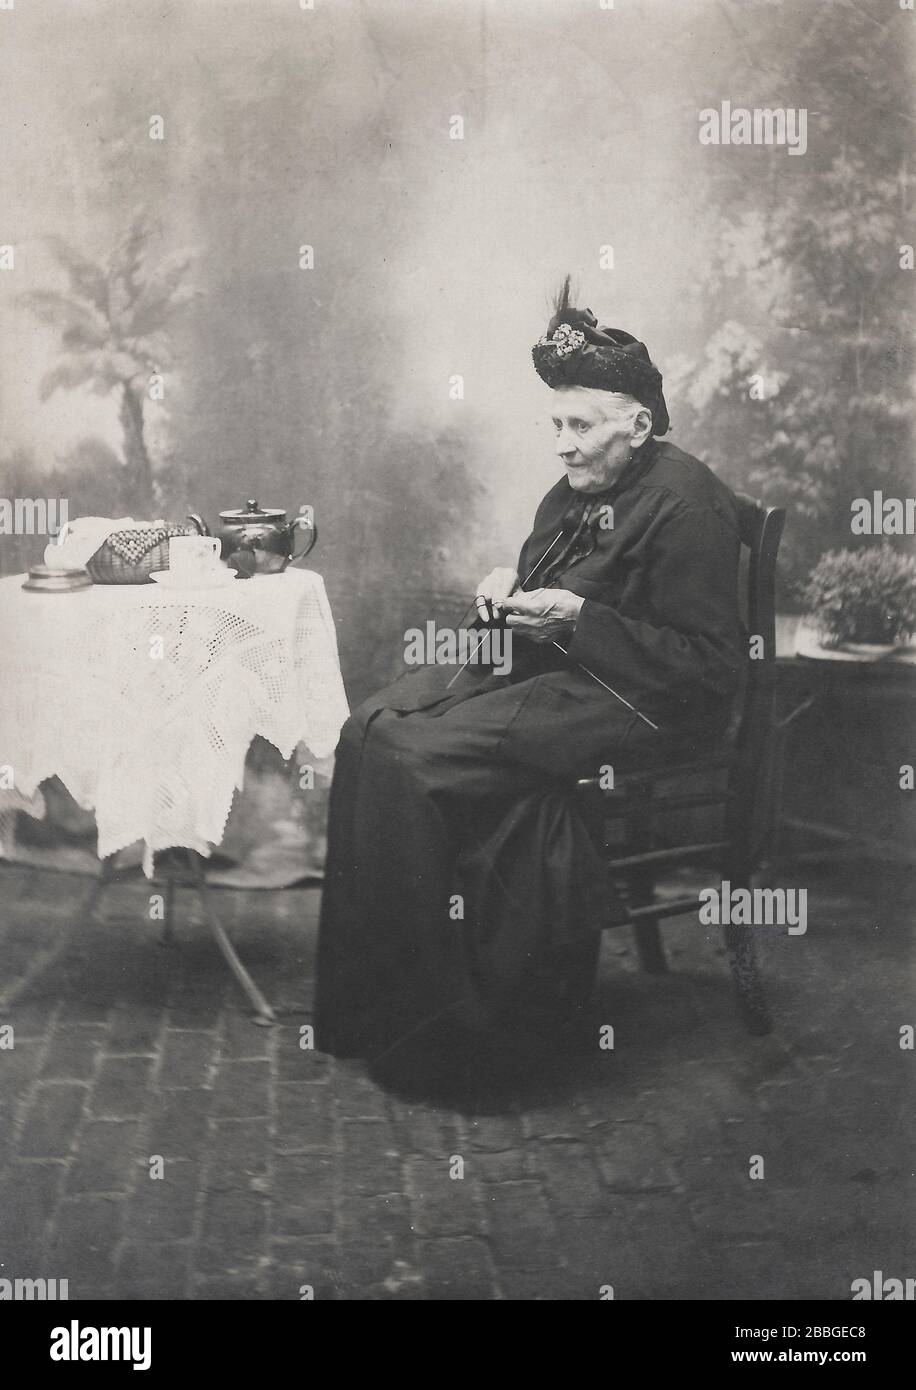 studio photo setup showing an old woman stitching, knitting, sewing in front of a typical studio background around 1900-1910 in the area of Antwerp, B Stock Photo